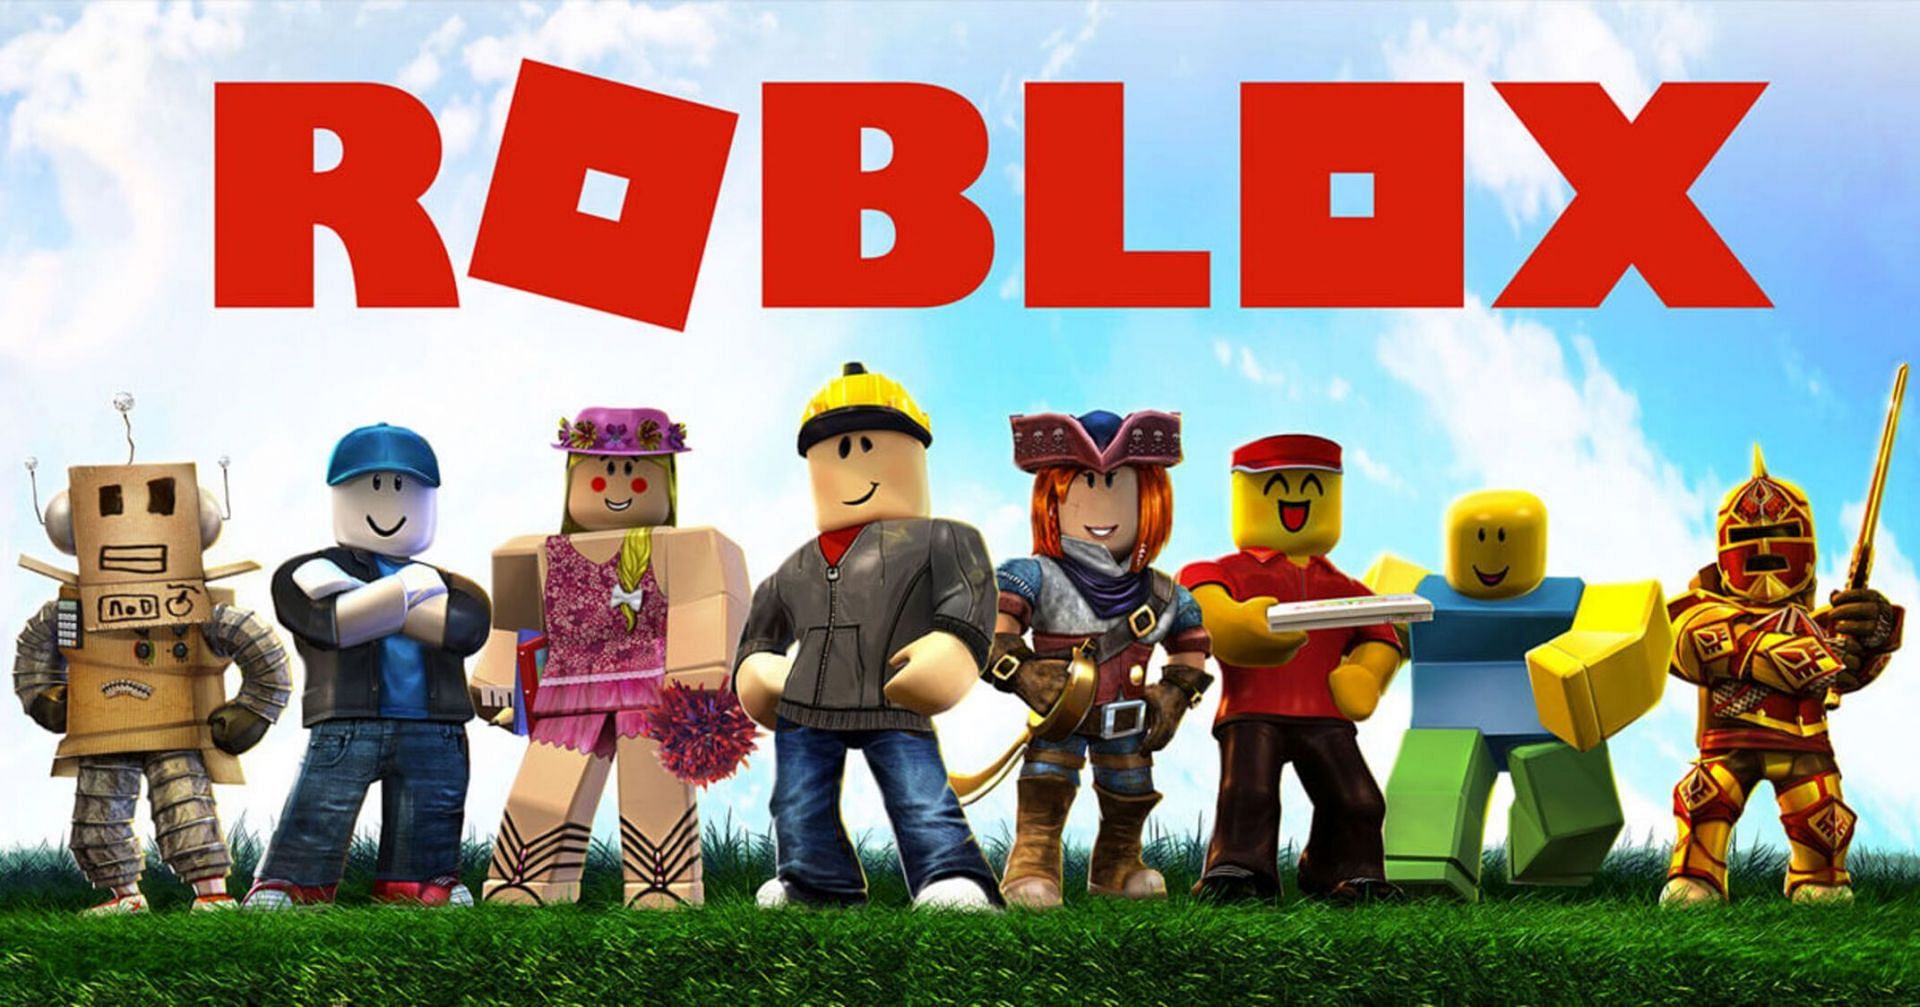 Most popular games on Roblox (Image via Roblox)